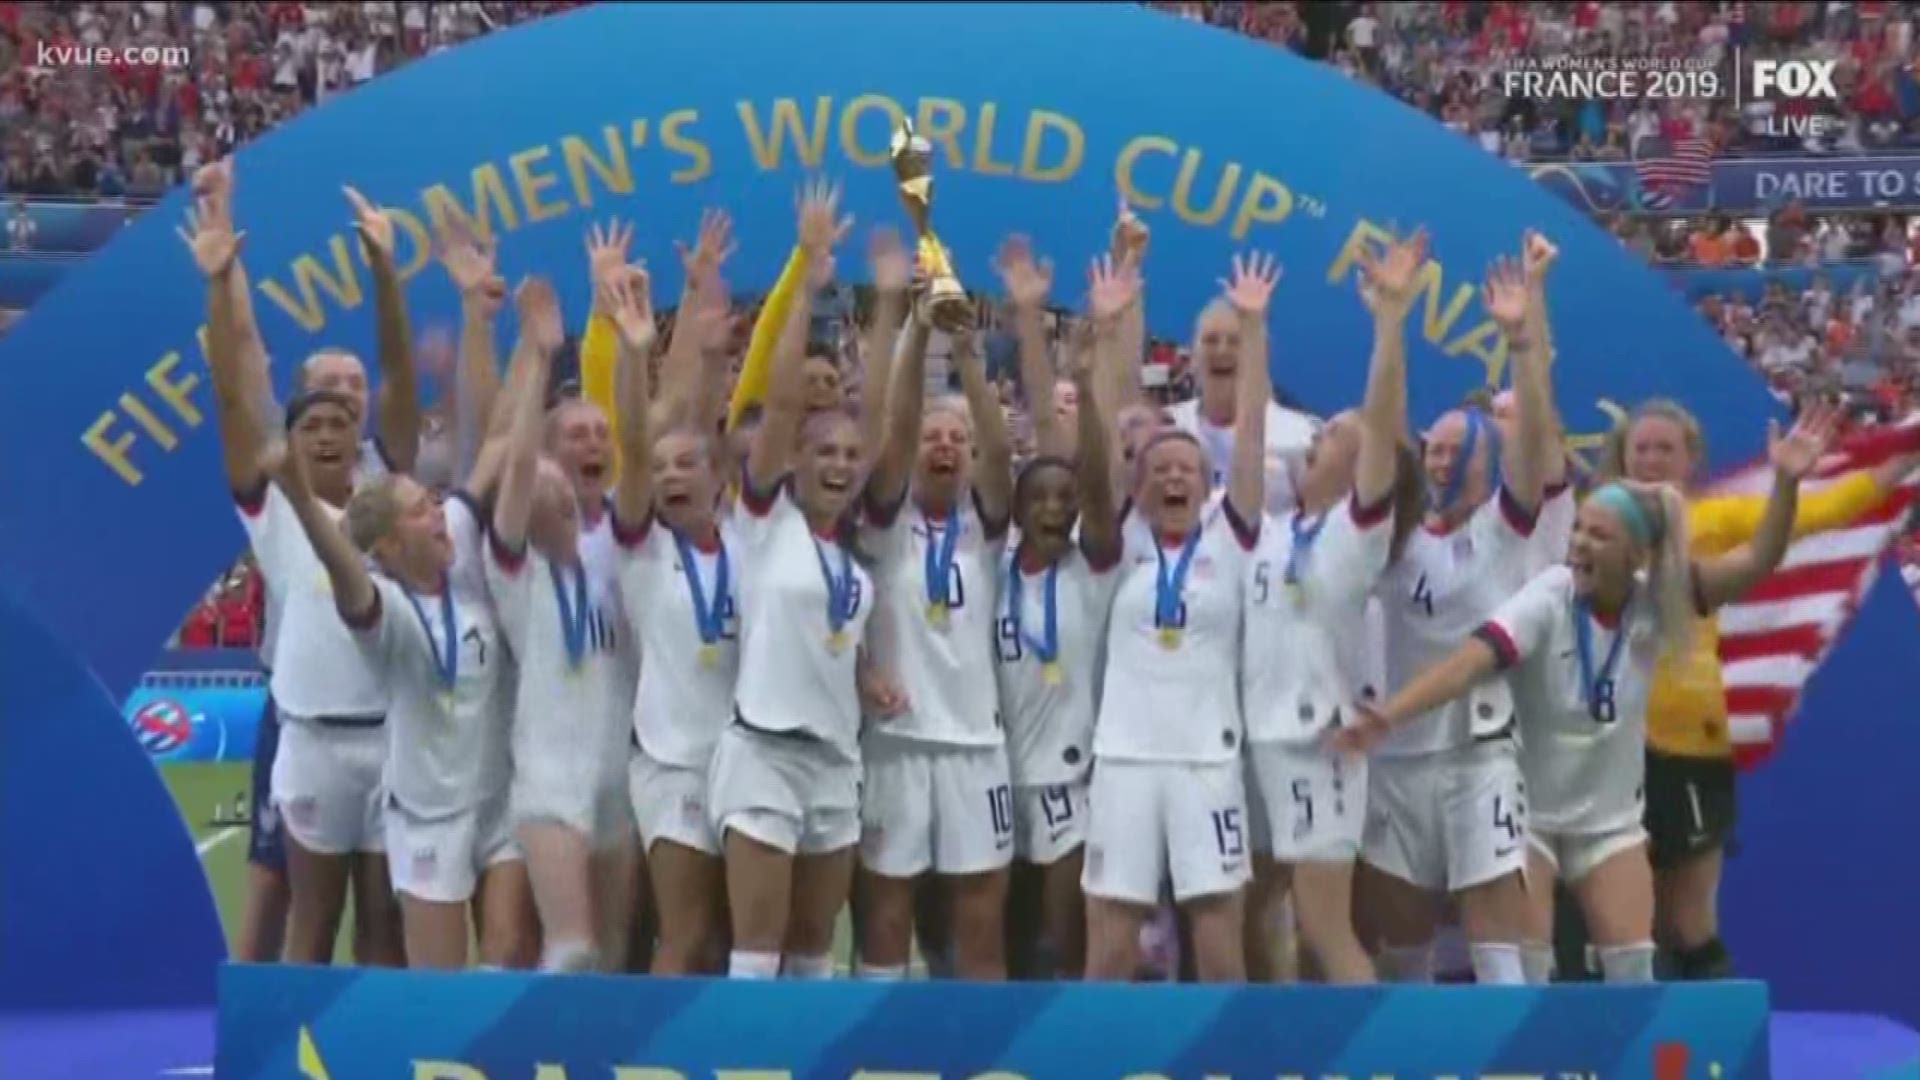 Fans chanted "equal pay" after the U.S. Women's Soccer Team won the FIFA World Cup.